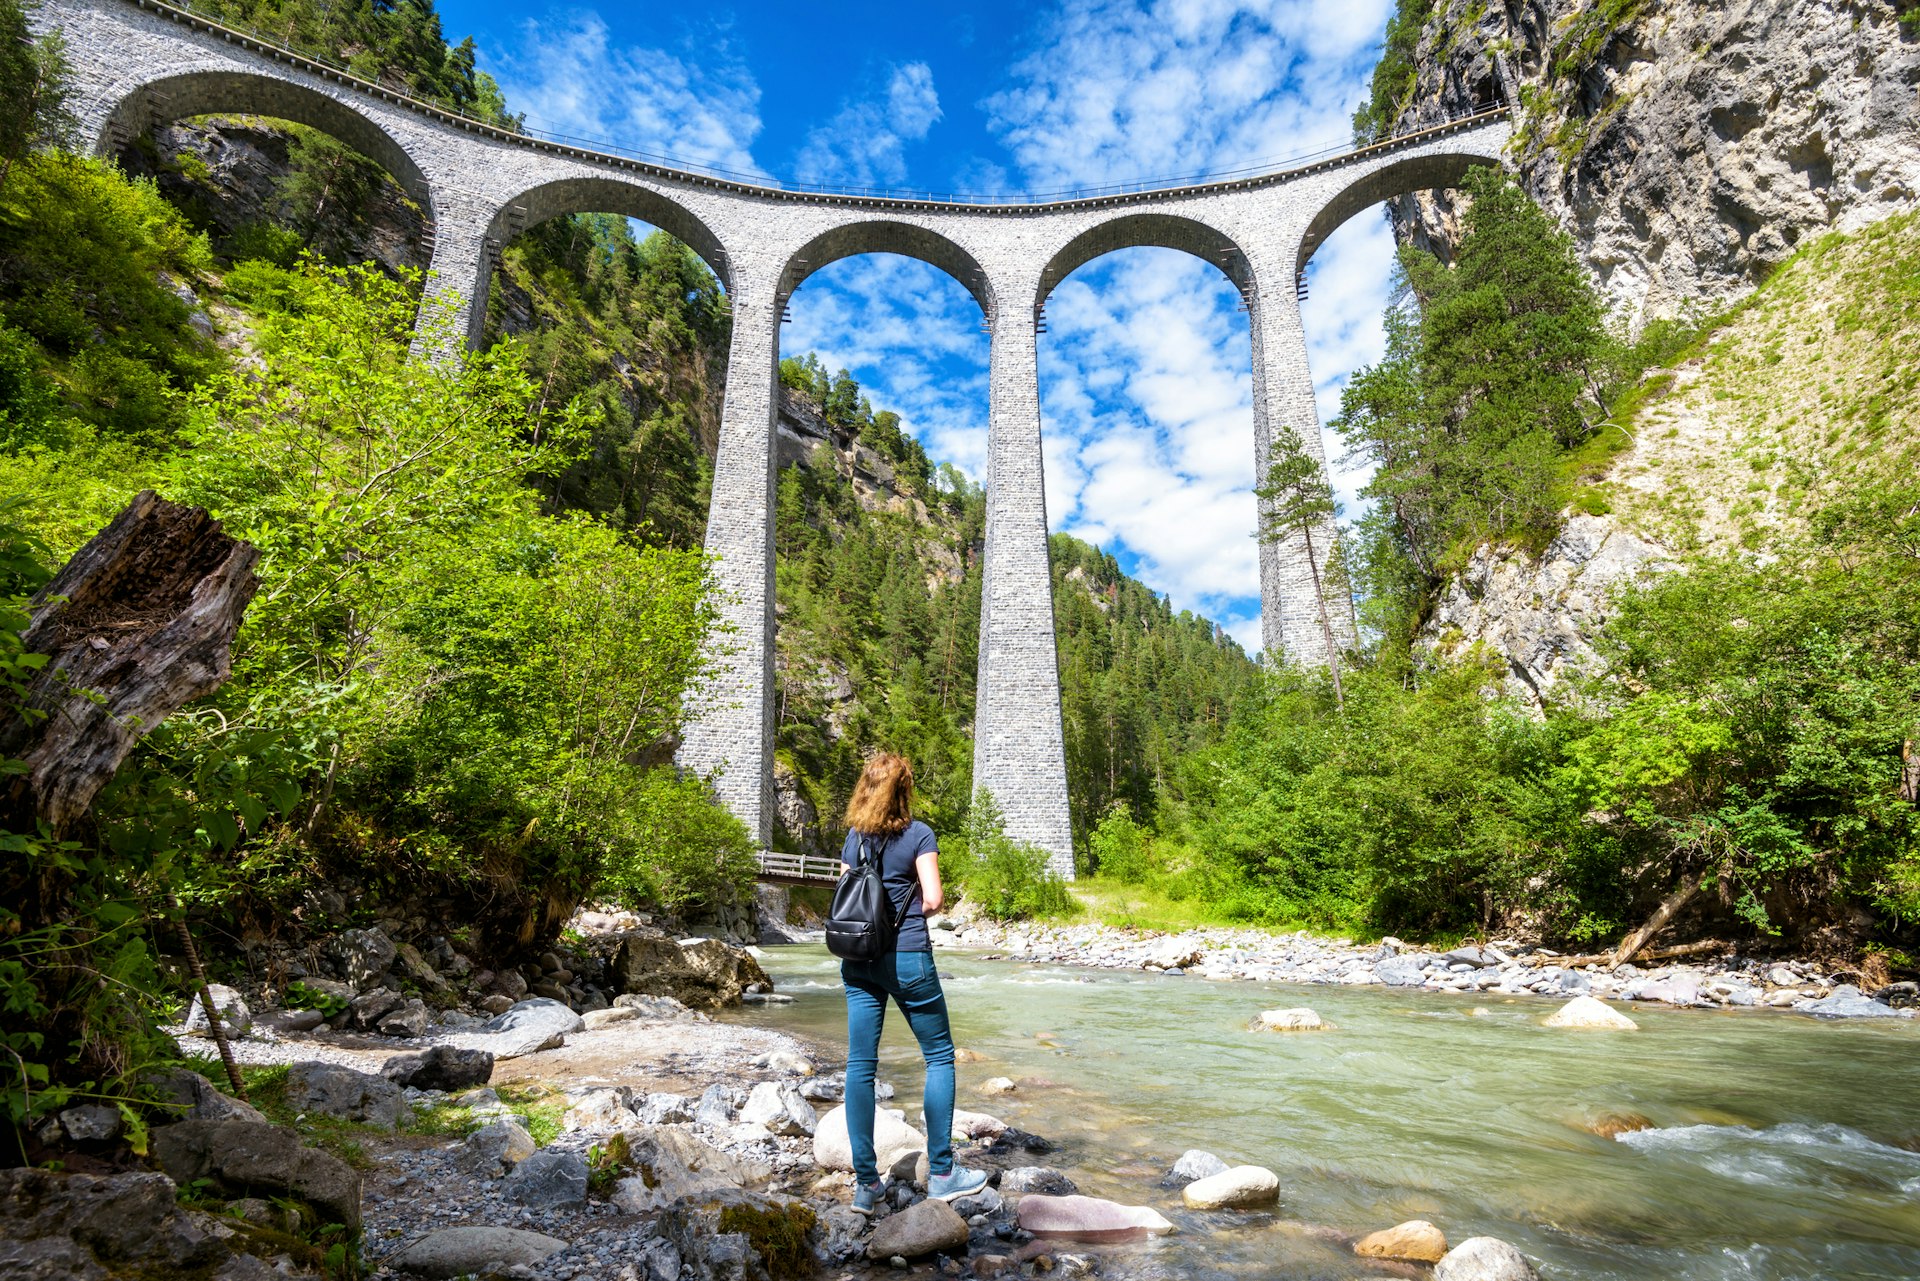 A woman stands at the edge of a river looking upwards at a multi-arched viaduct